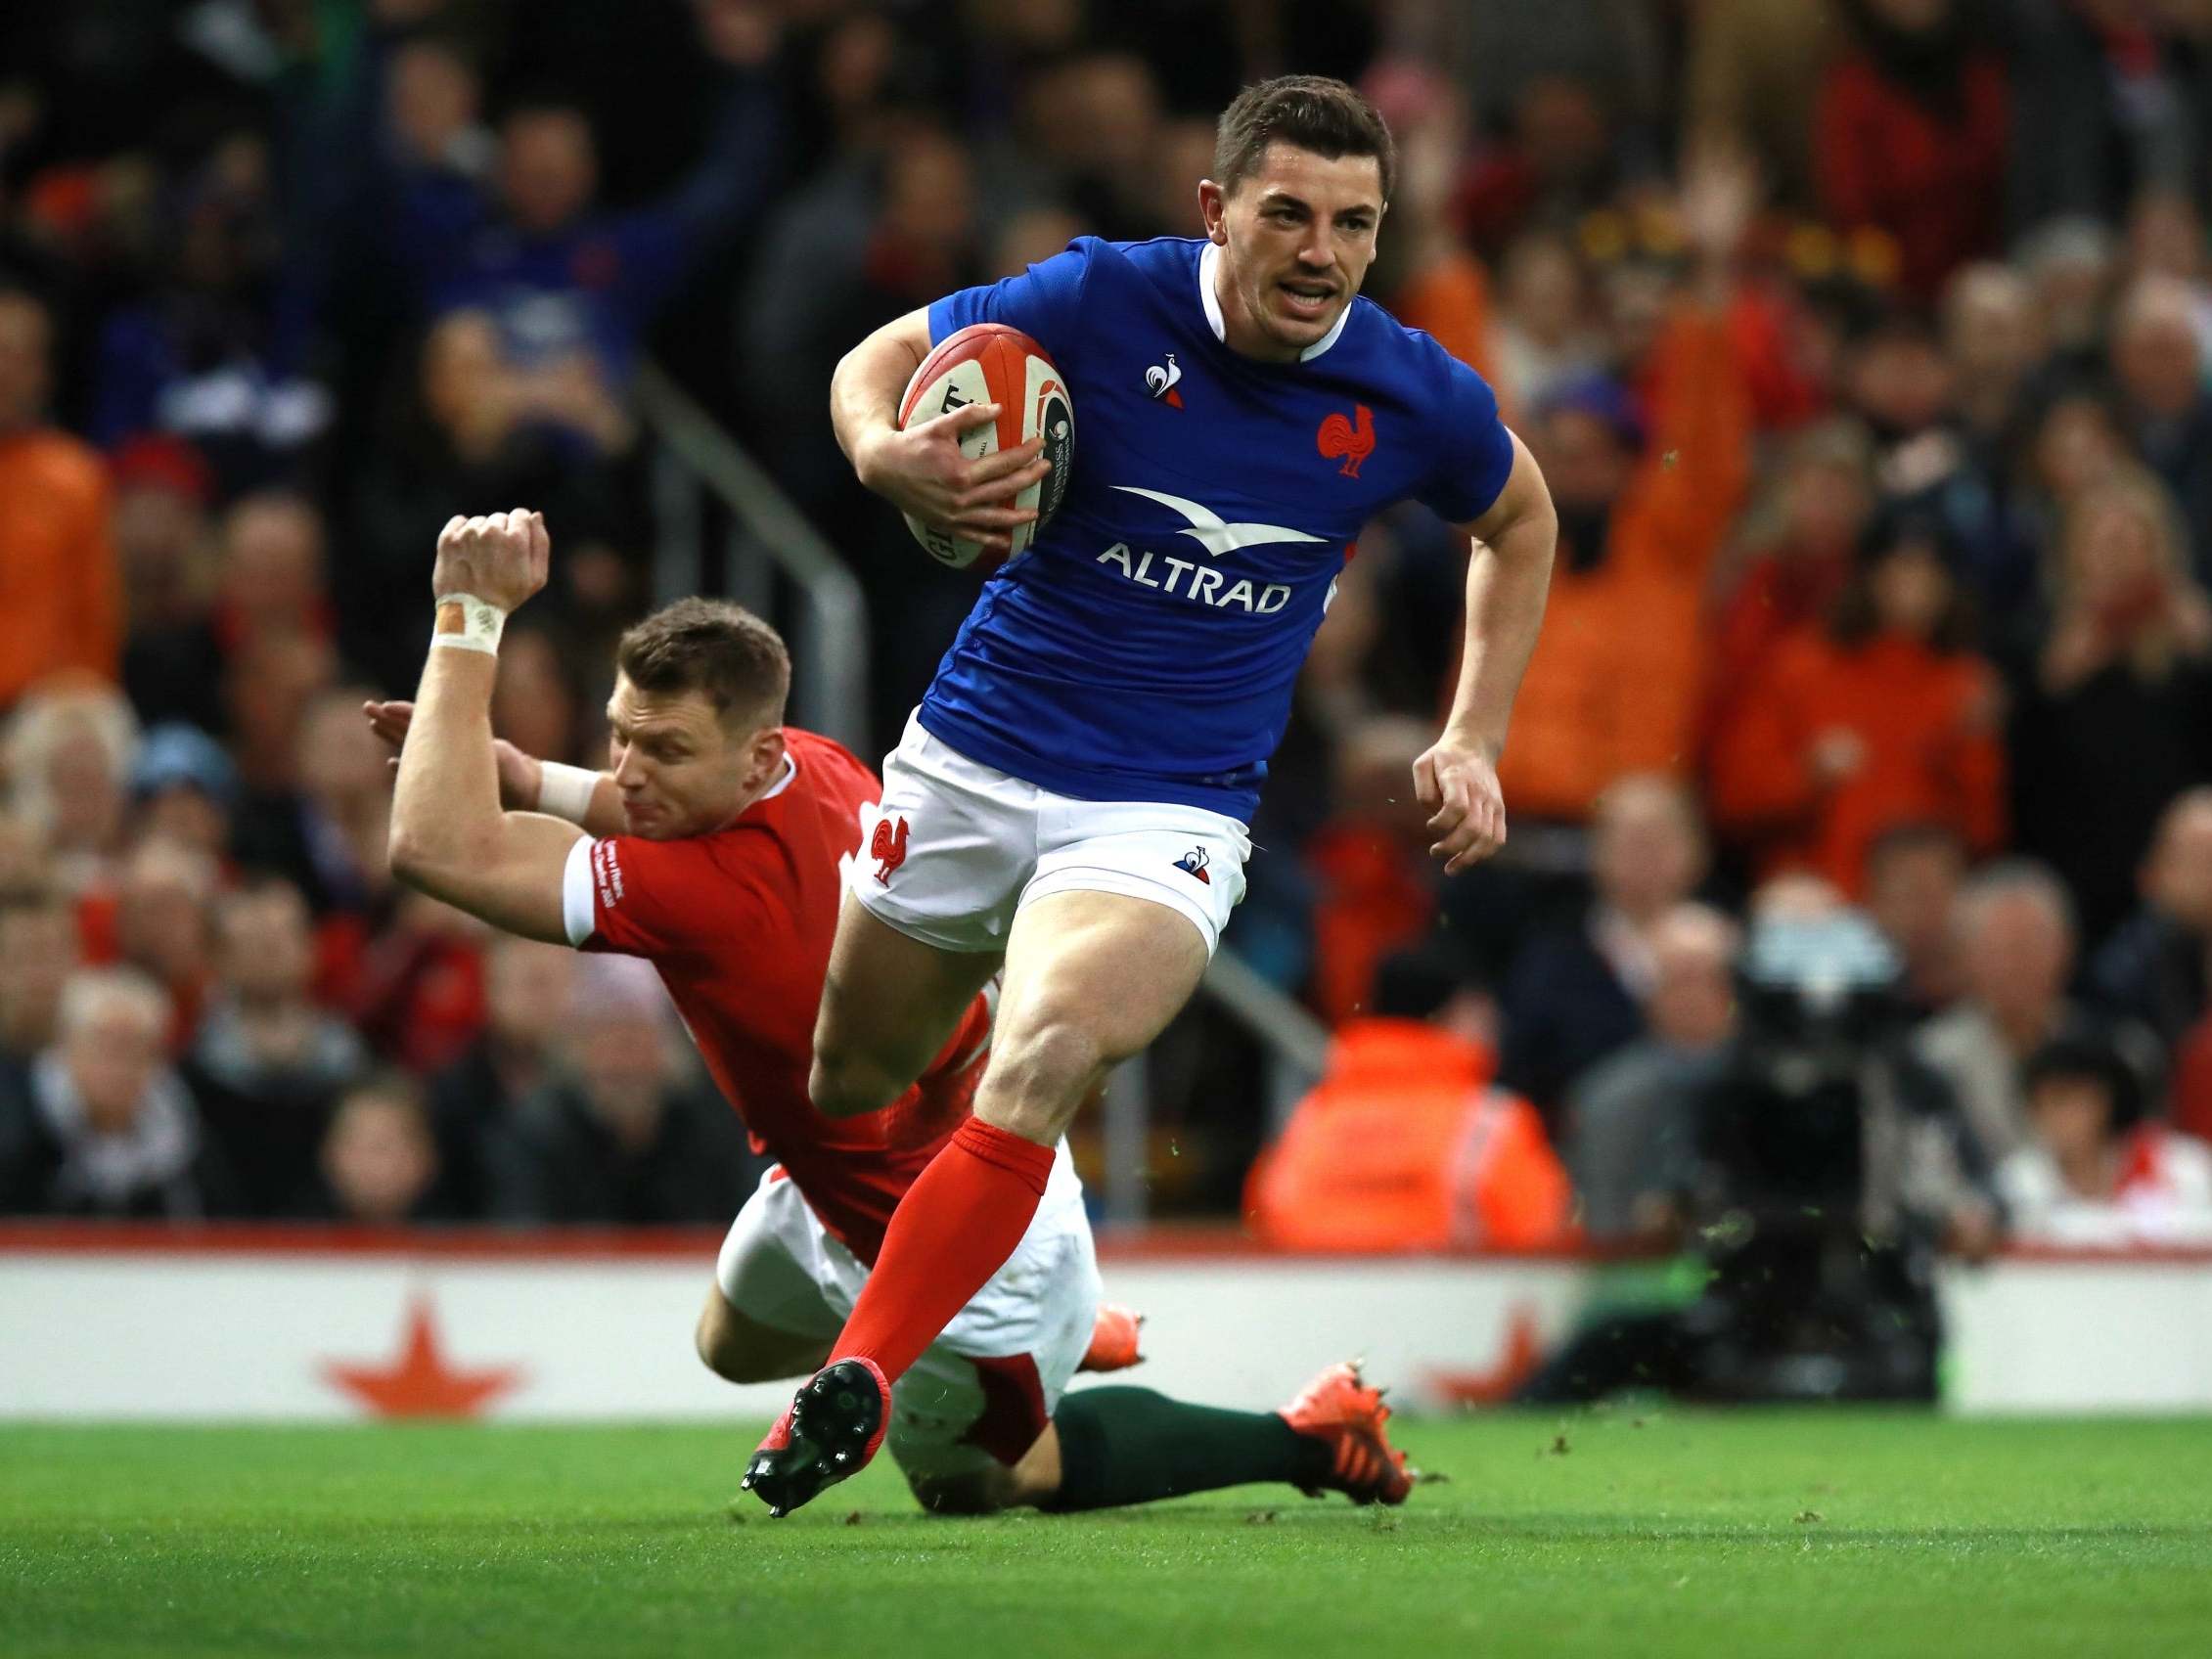 Anthony Bouthier scored France’s first try against Wales